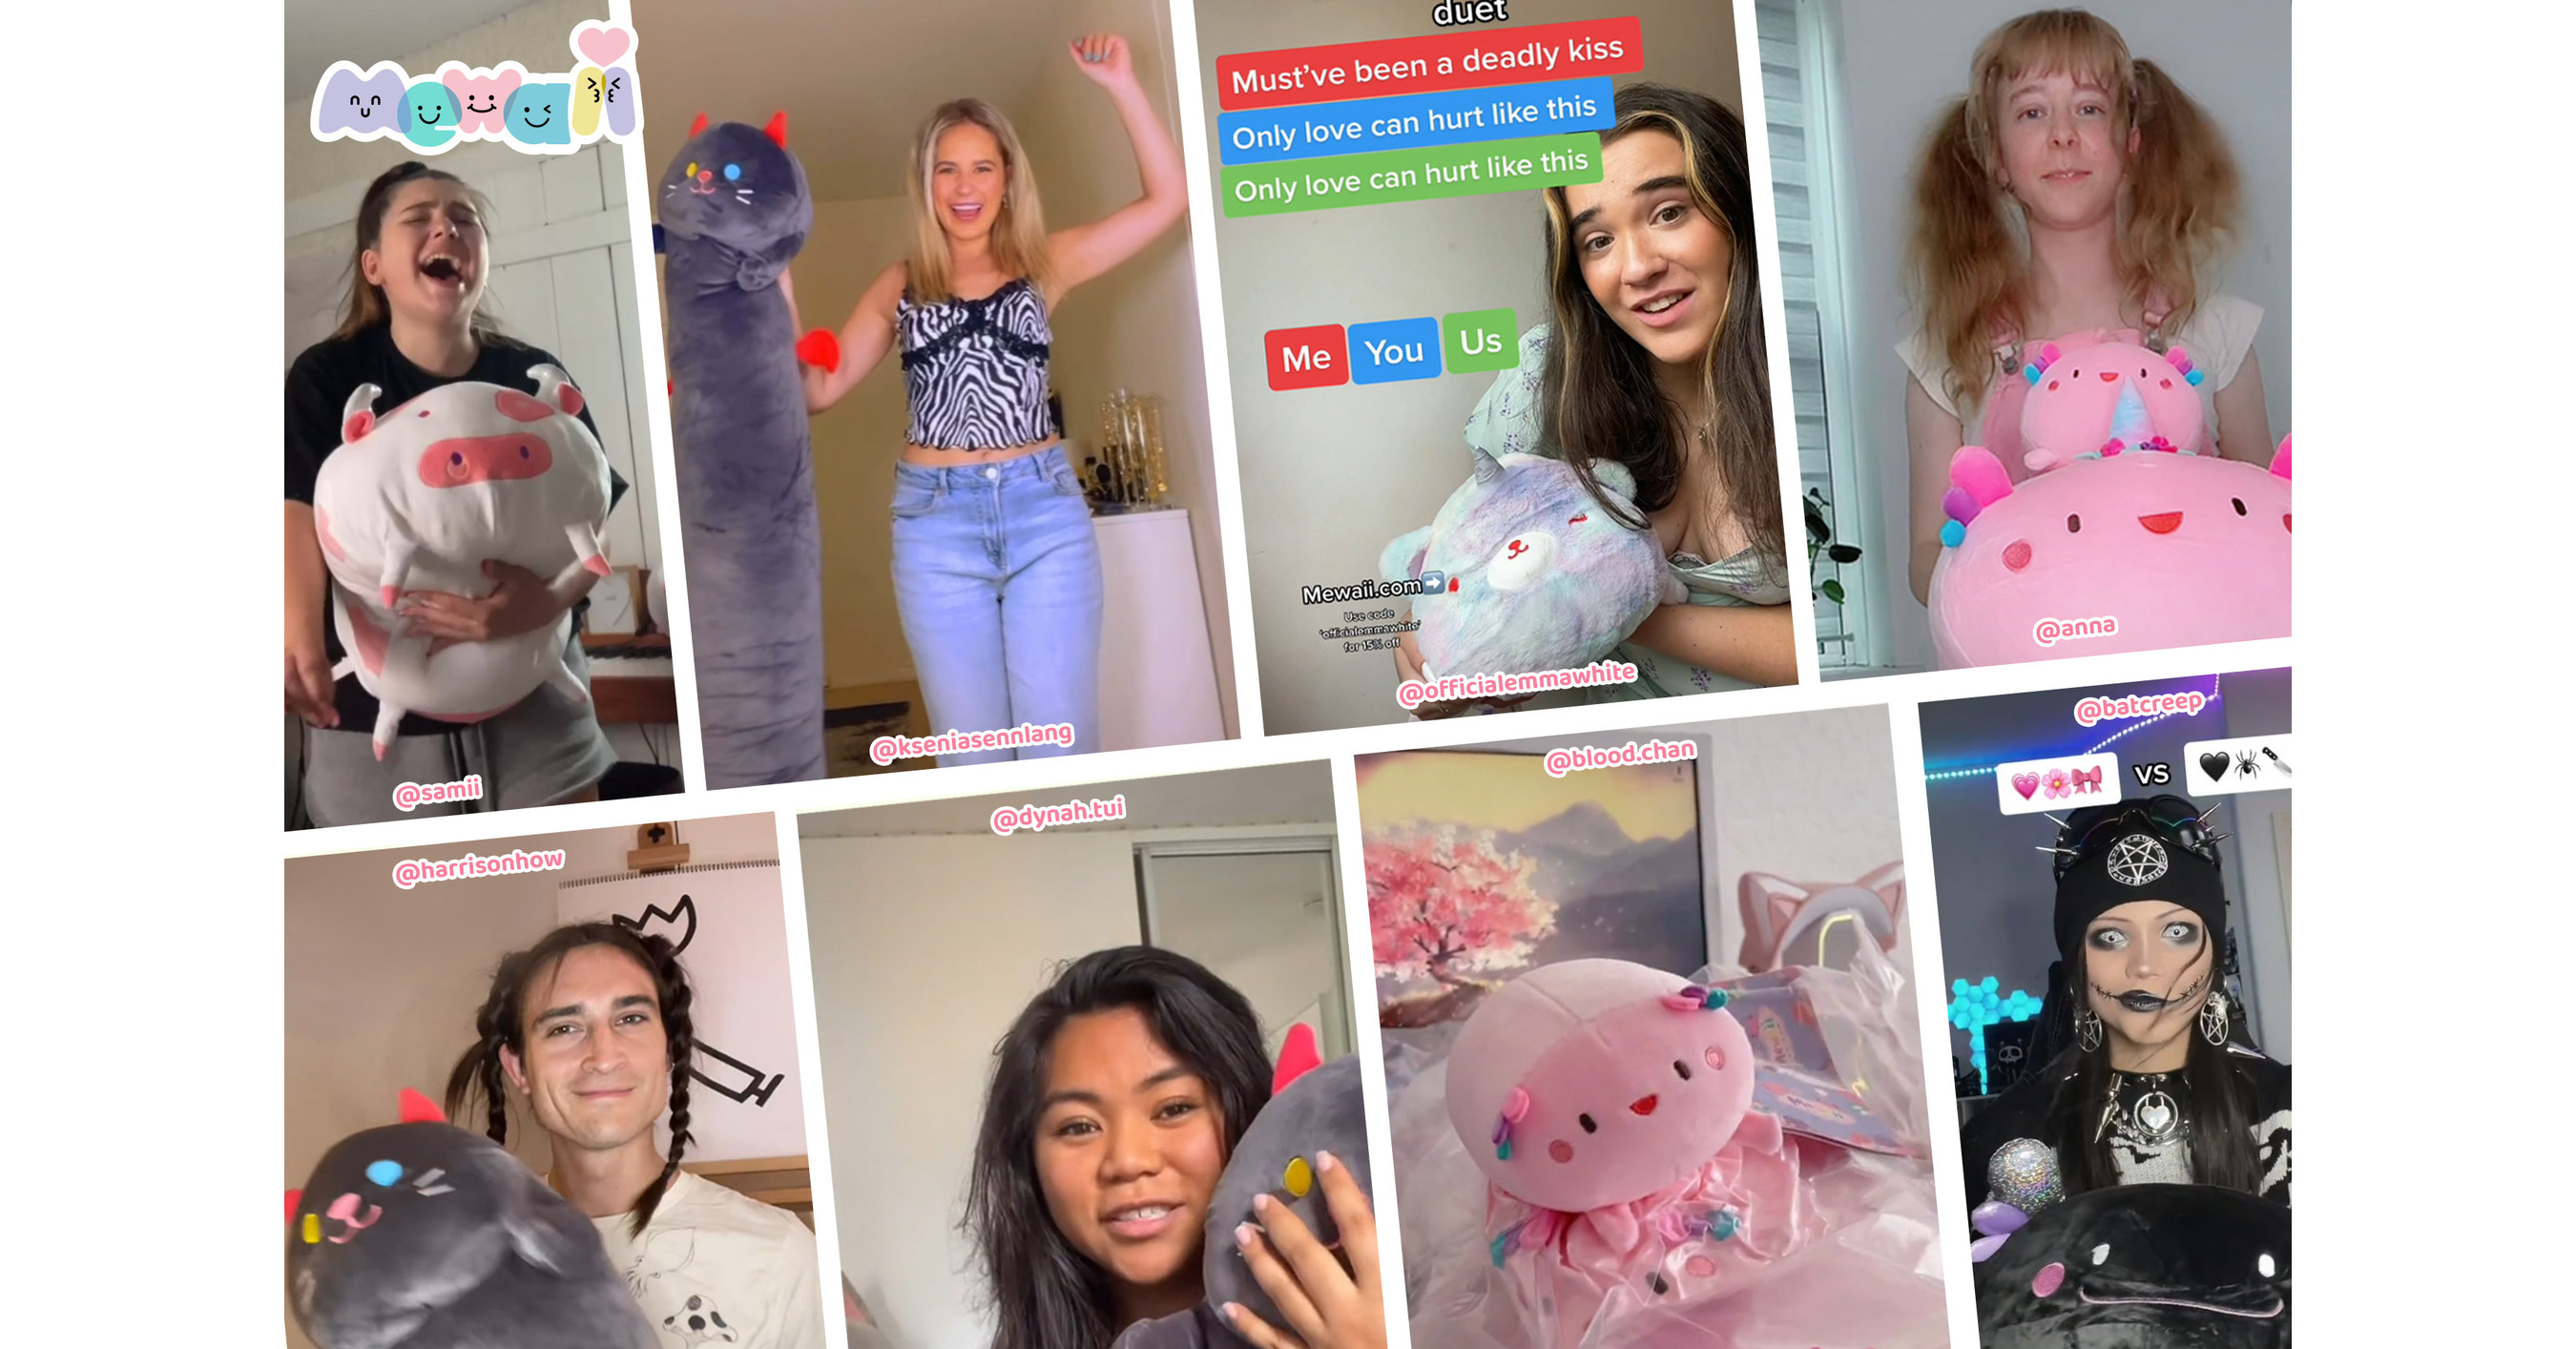 The Rise of New Plush Brand Mewaii in the Post-Pandemic Future, Mewaii  plushies sparked a frenzy of 3 million teens on TikTok